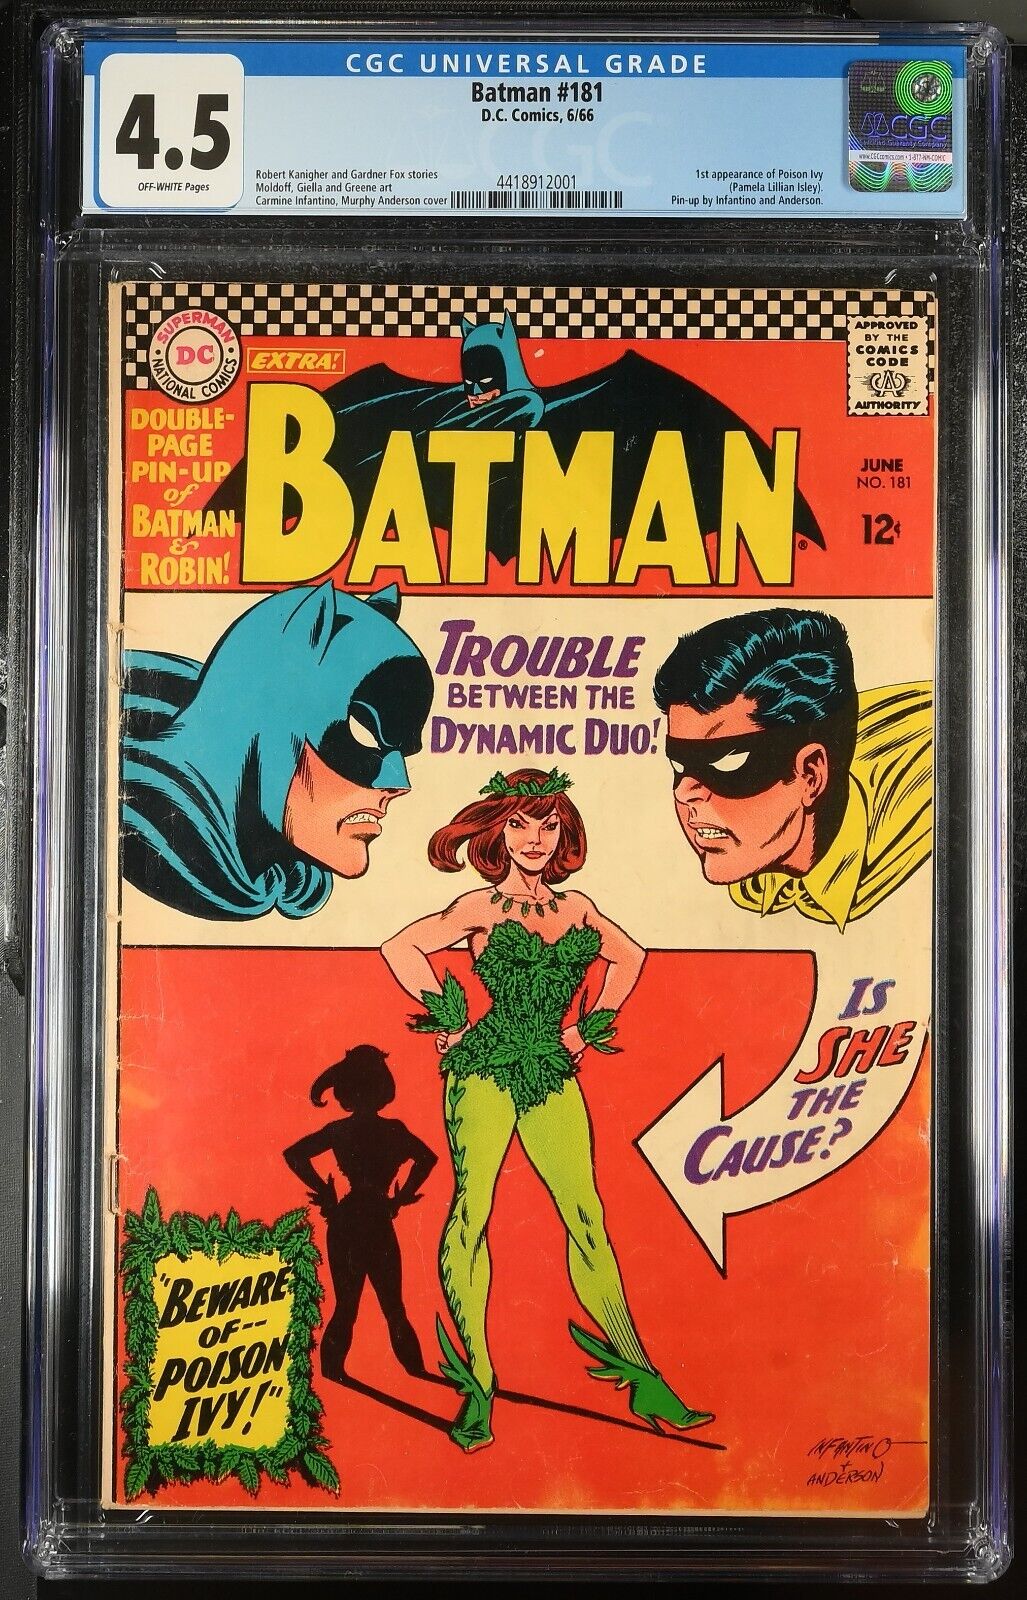 BATMAN #181 KEY 1st APPEARANCE POISON IVY WITH PIN-UP CENTERFOLD, CGC 4.5